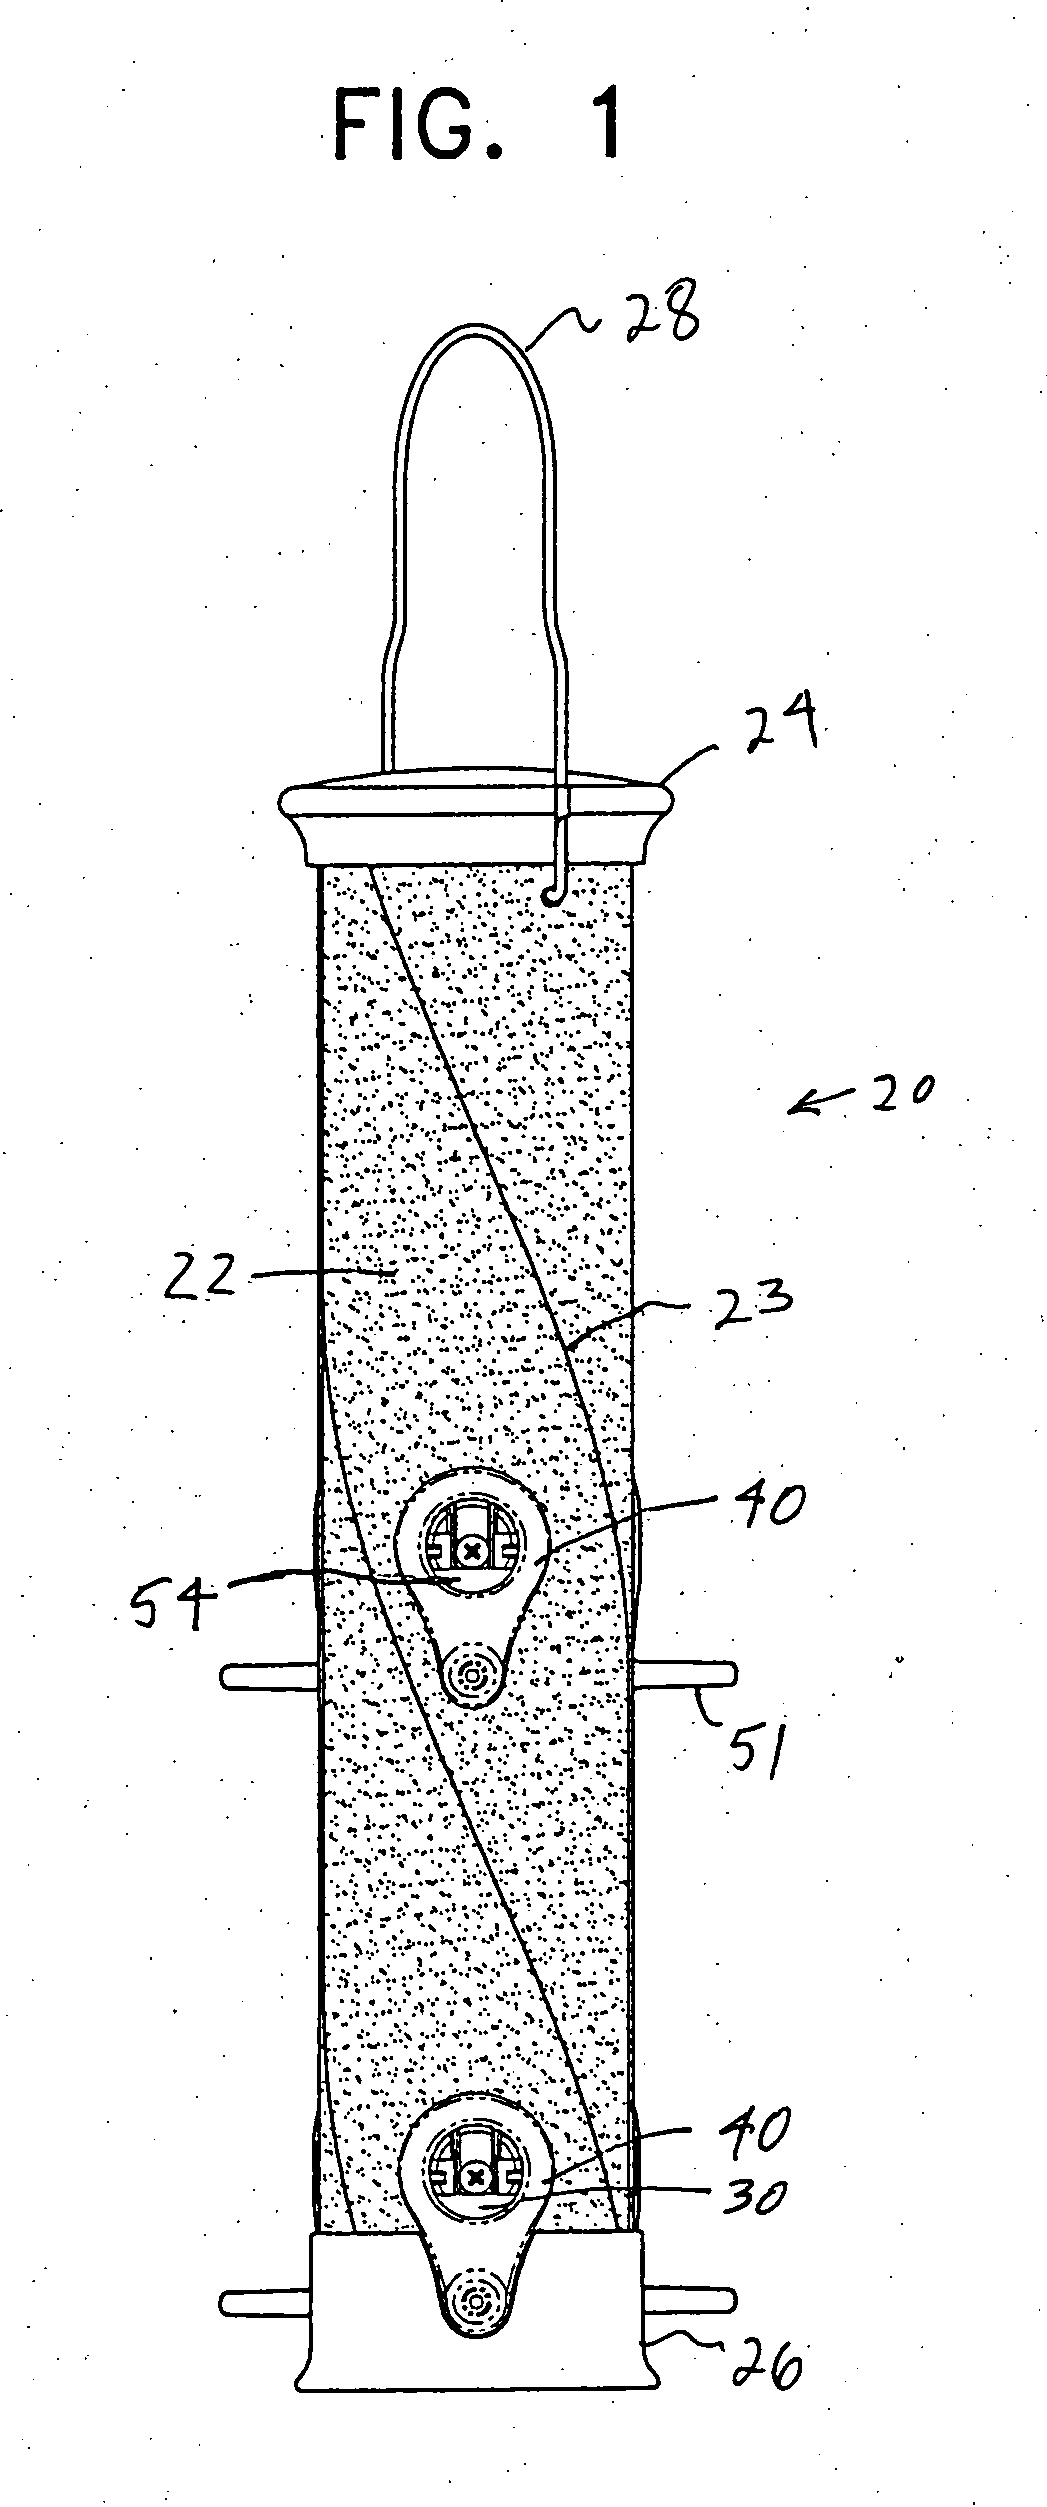 Port attachment system for bird feeders and the like